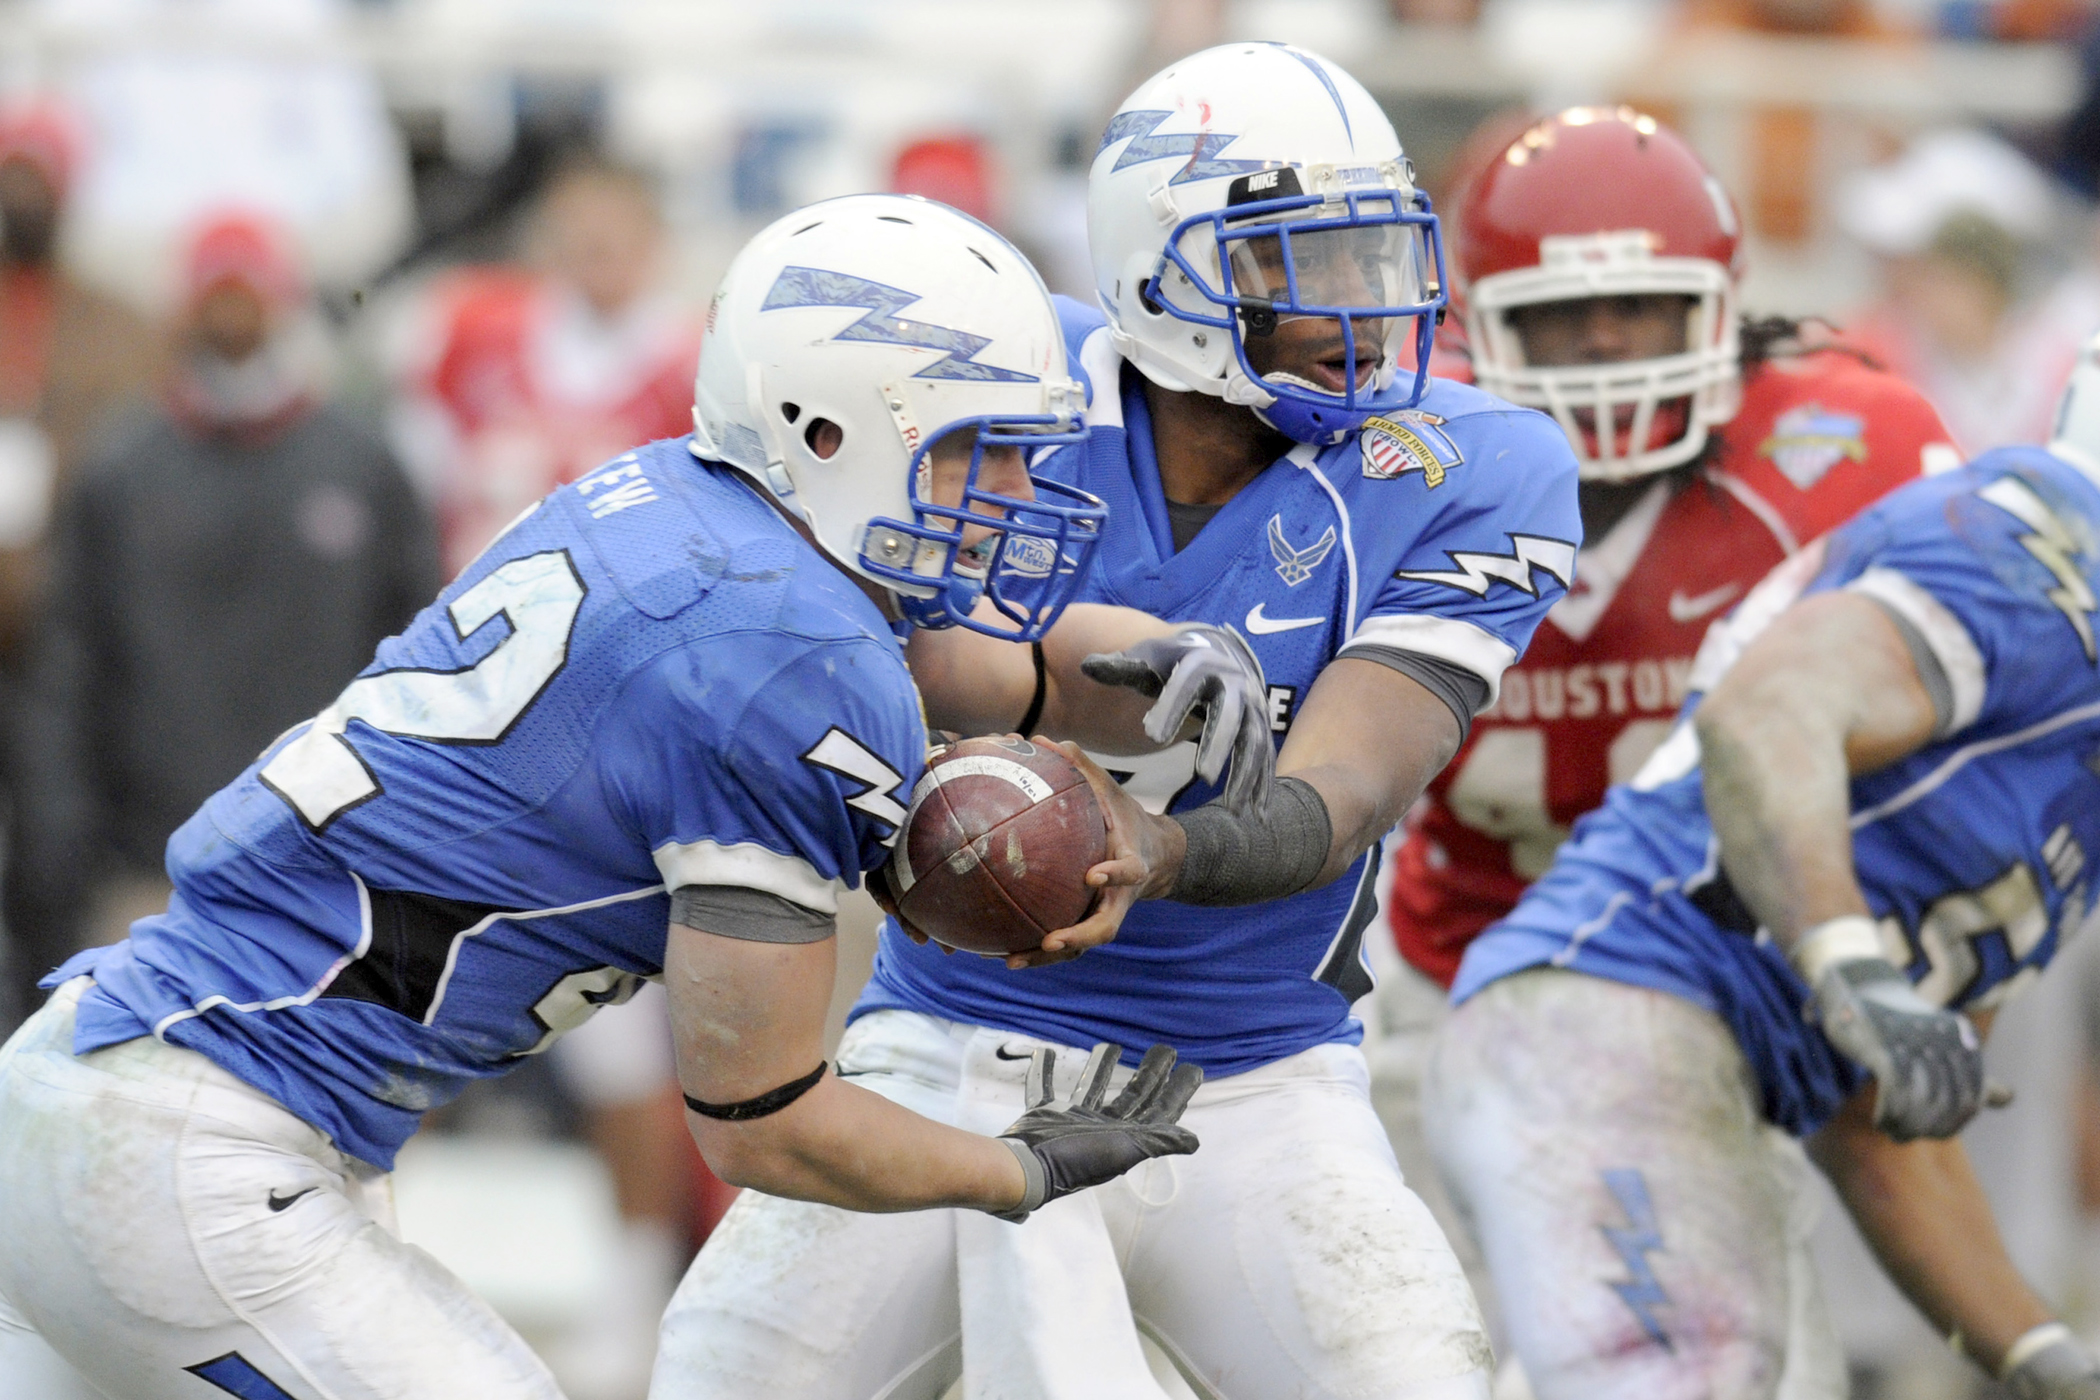 Air Force Football Team Ranked Second Nationally In Academic Performance U S Air Force Article Display